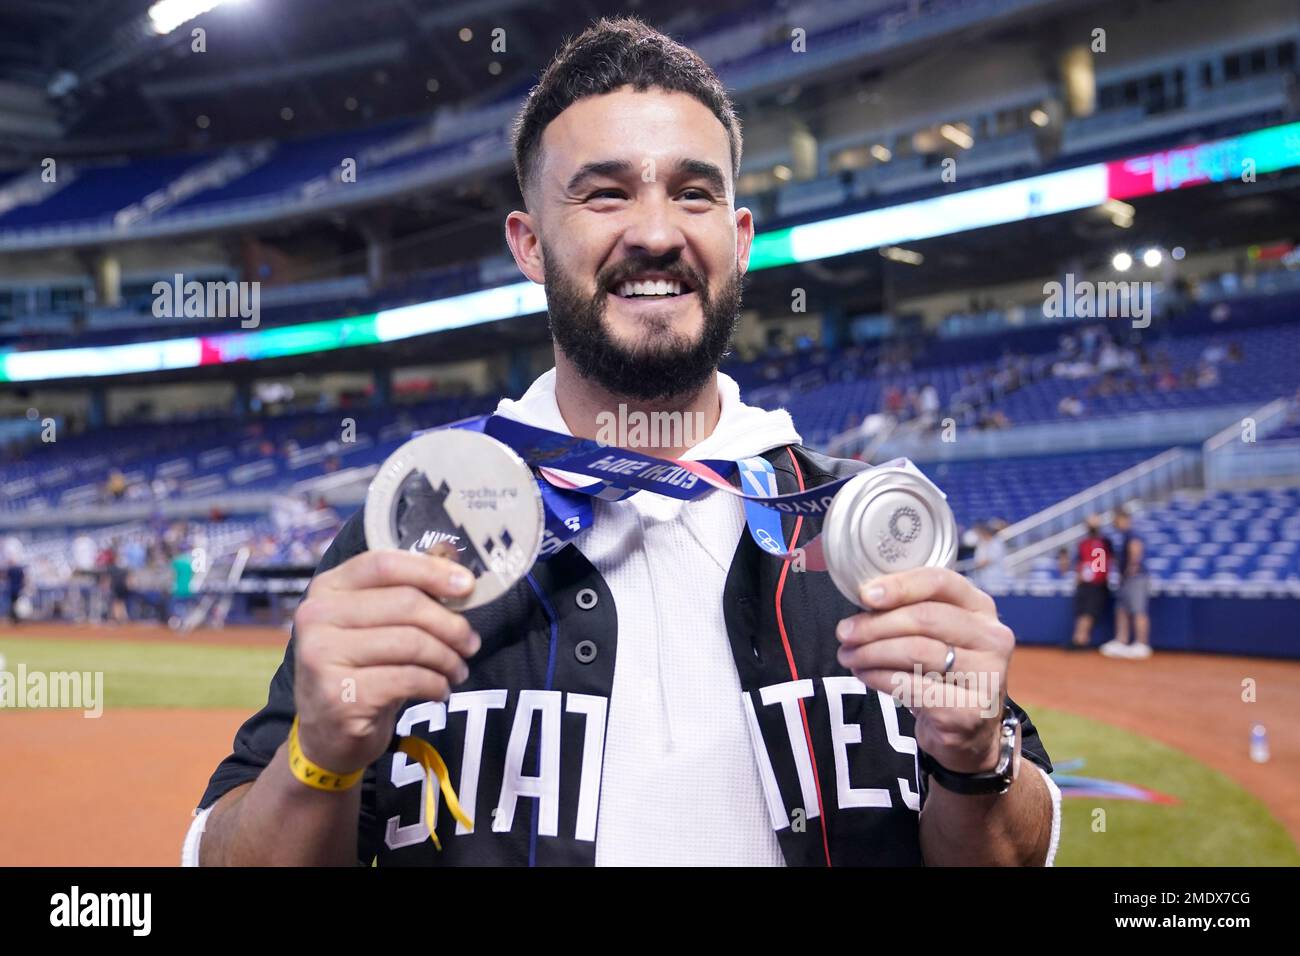 Marlins news: Eddy Alvarez chasing another medal in Summer